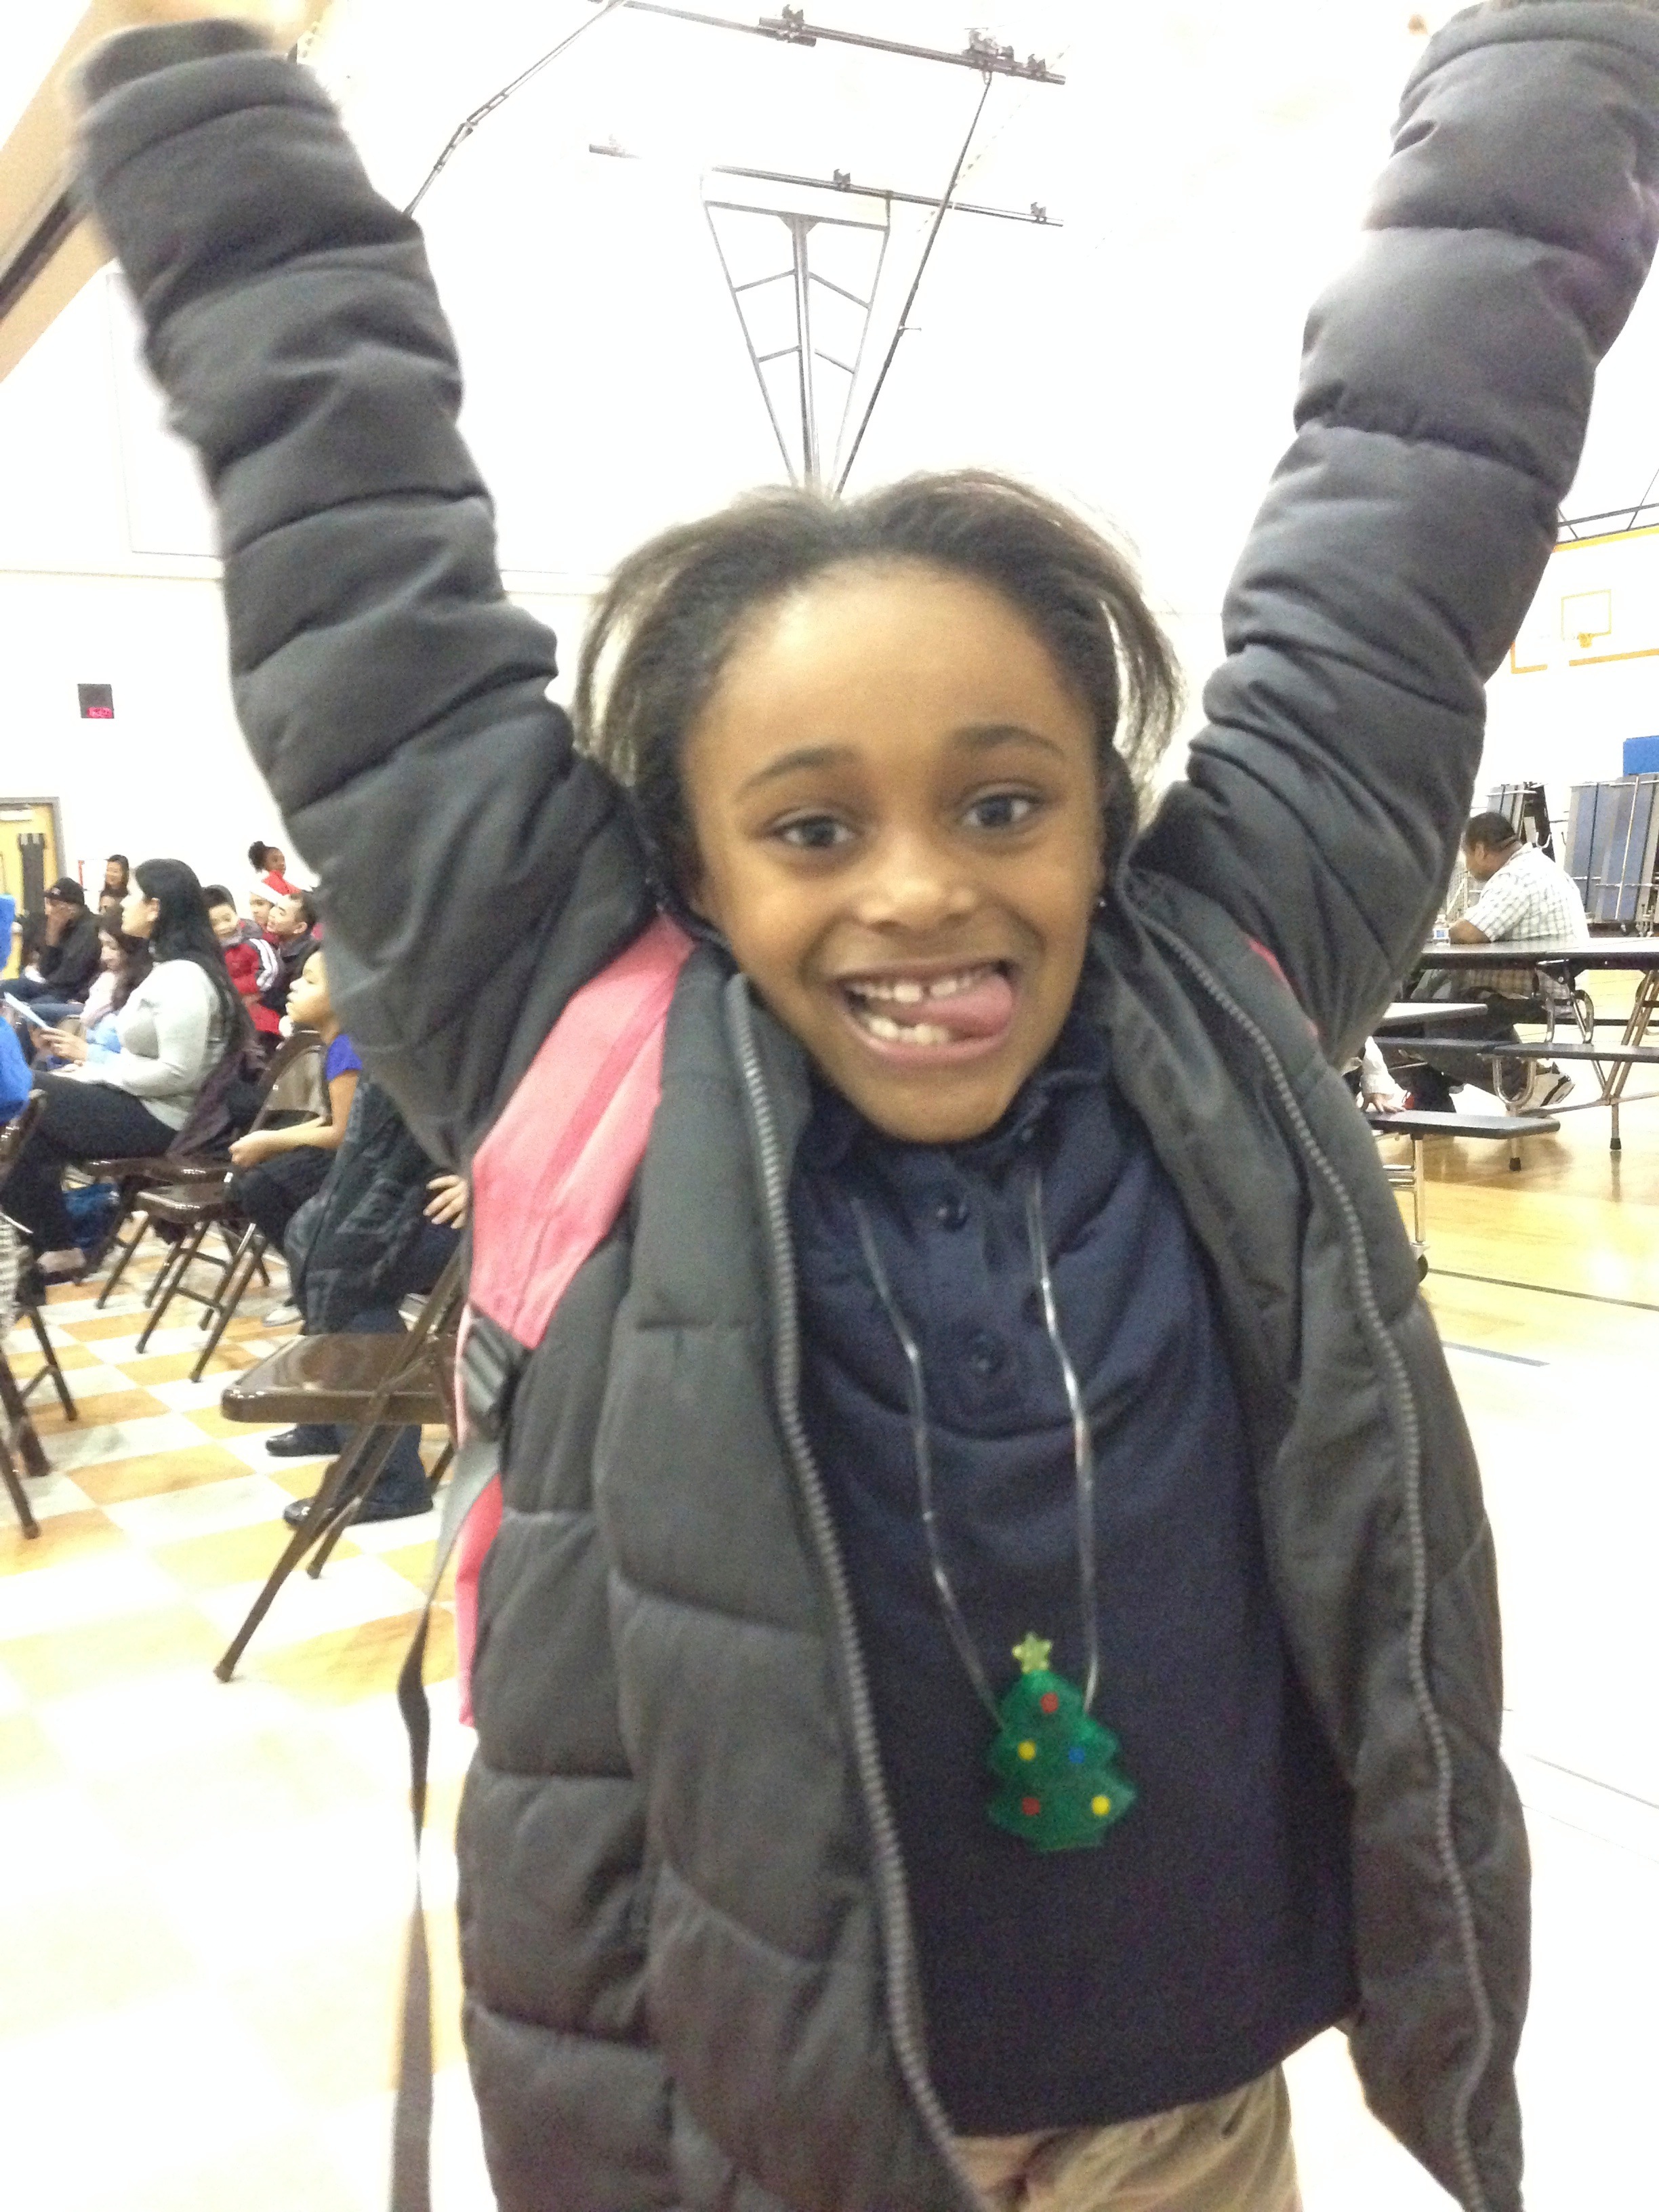 Alivia, an energetic second grader at Emerson, taking the jumping jack challenge!